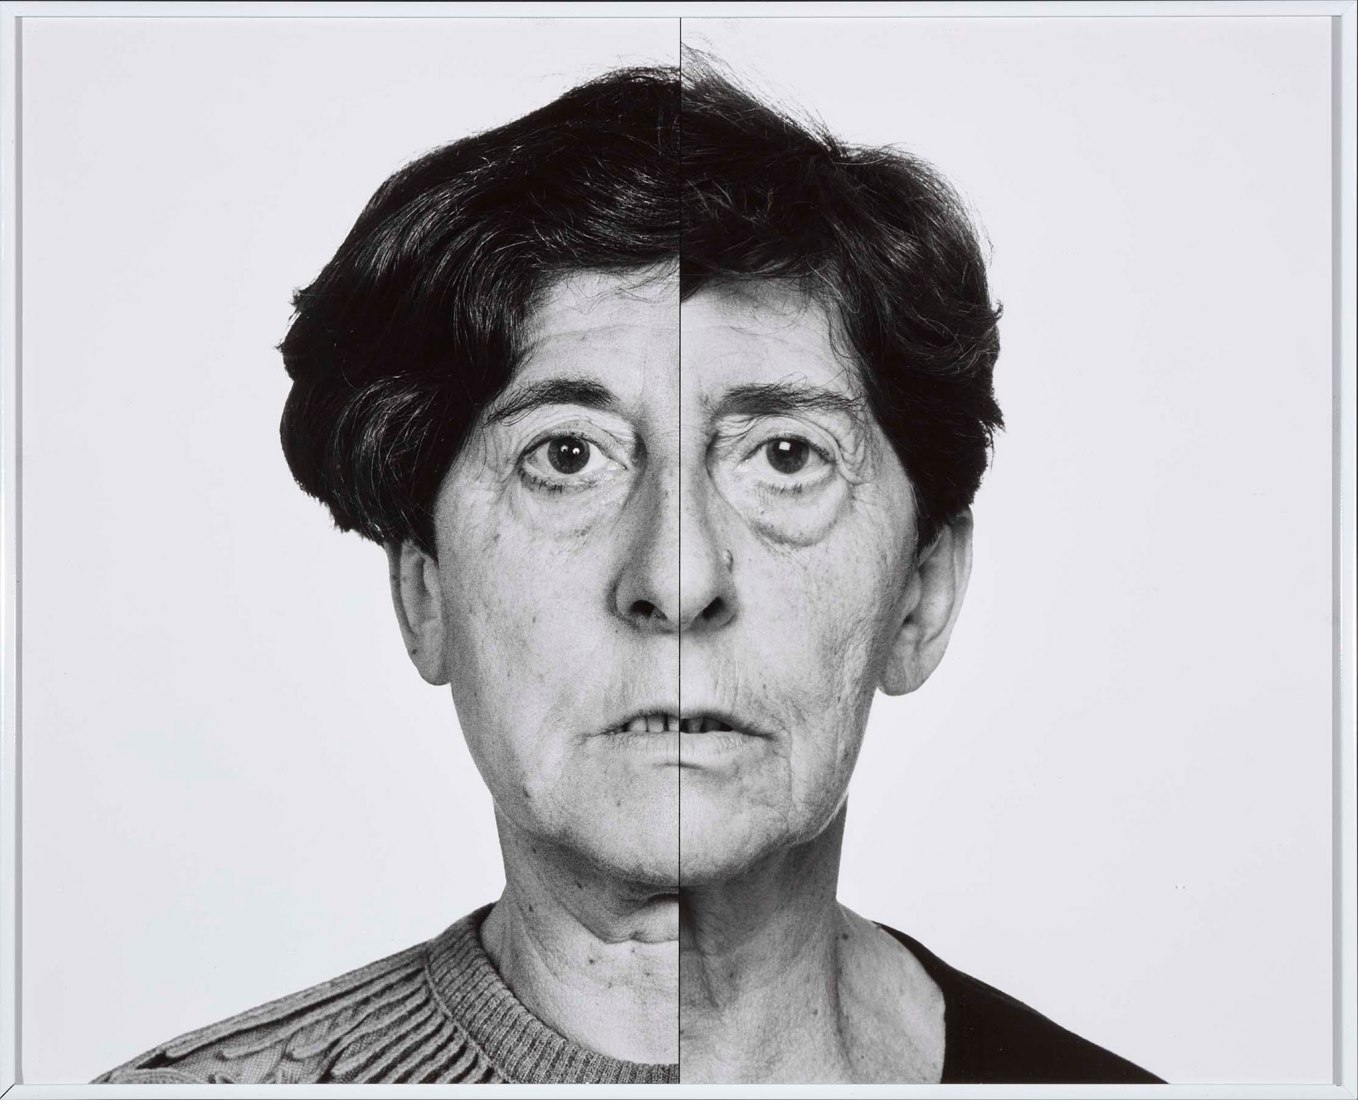 Autorretrato en el tiempo (Self-Portrait in Time) by Esther Ferrer (1994-1989). Gelatin silver print on fiber-based paper, 40 x 50 cm. Edition/serial number: 1/3. Donation to Reina Sofía, 2018. Image of cortesy of MNCARS.